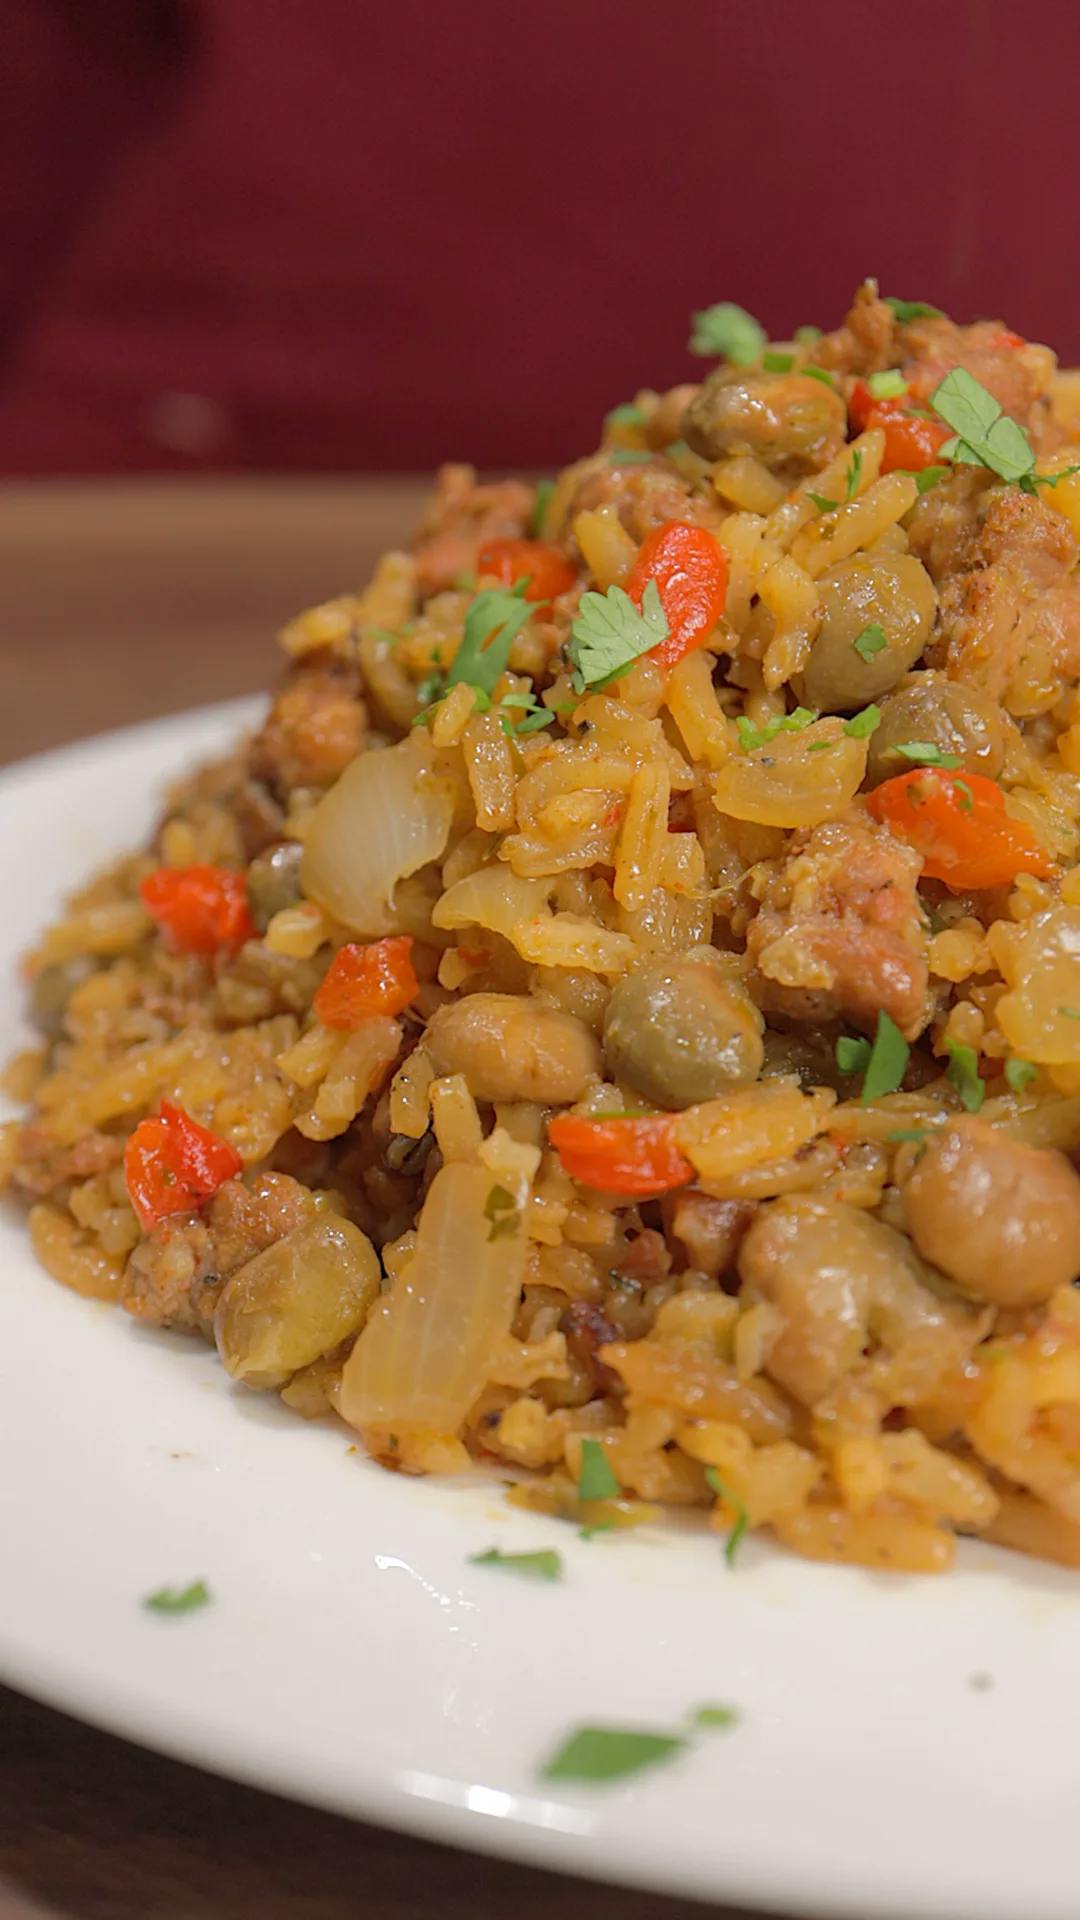 Picture for Arroz con Chorizo [Rice with Sausage]